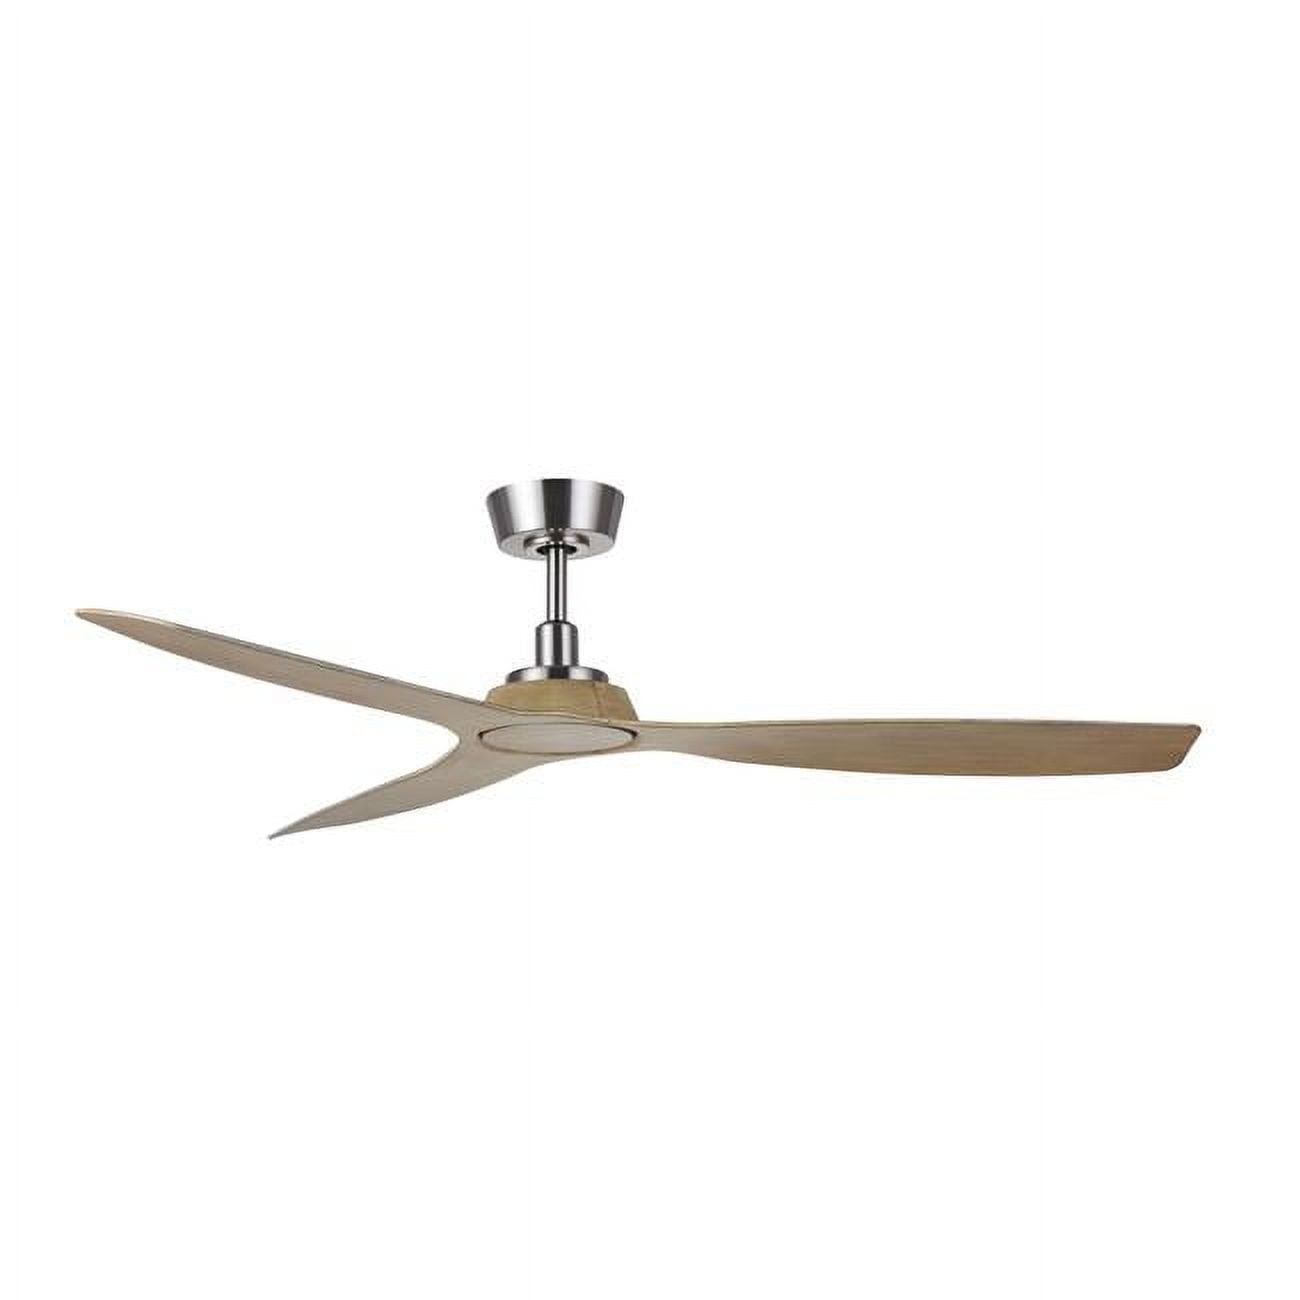 Picture of Lucci Air 21065301 Lucci Air Moto Brushed Nickel and Teak 52-inch Ceiling Fan